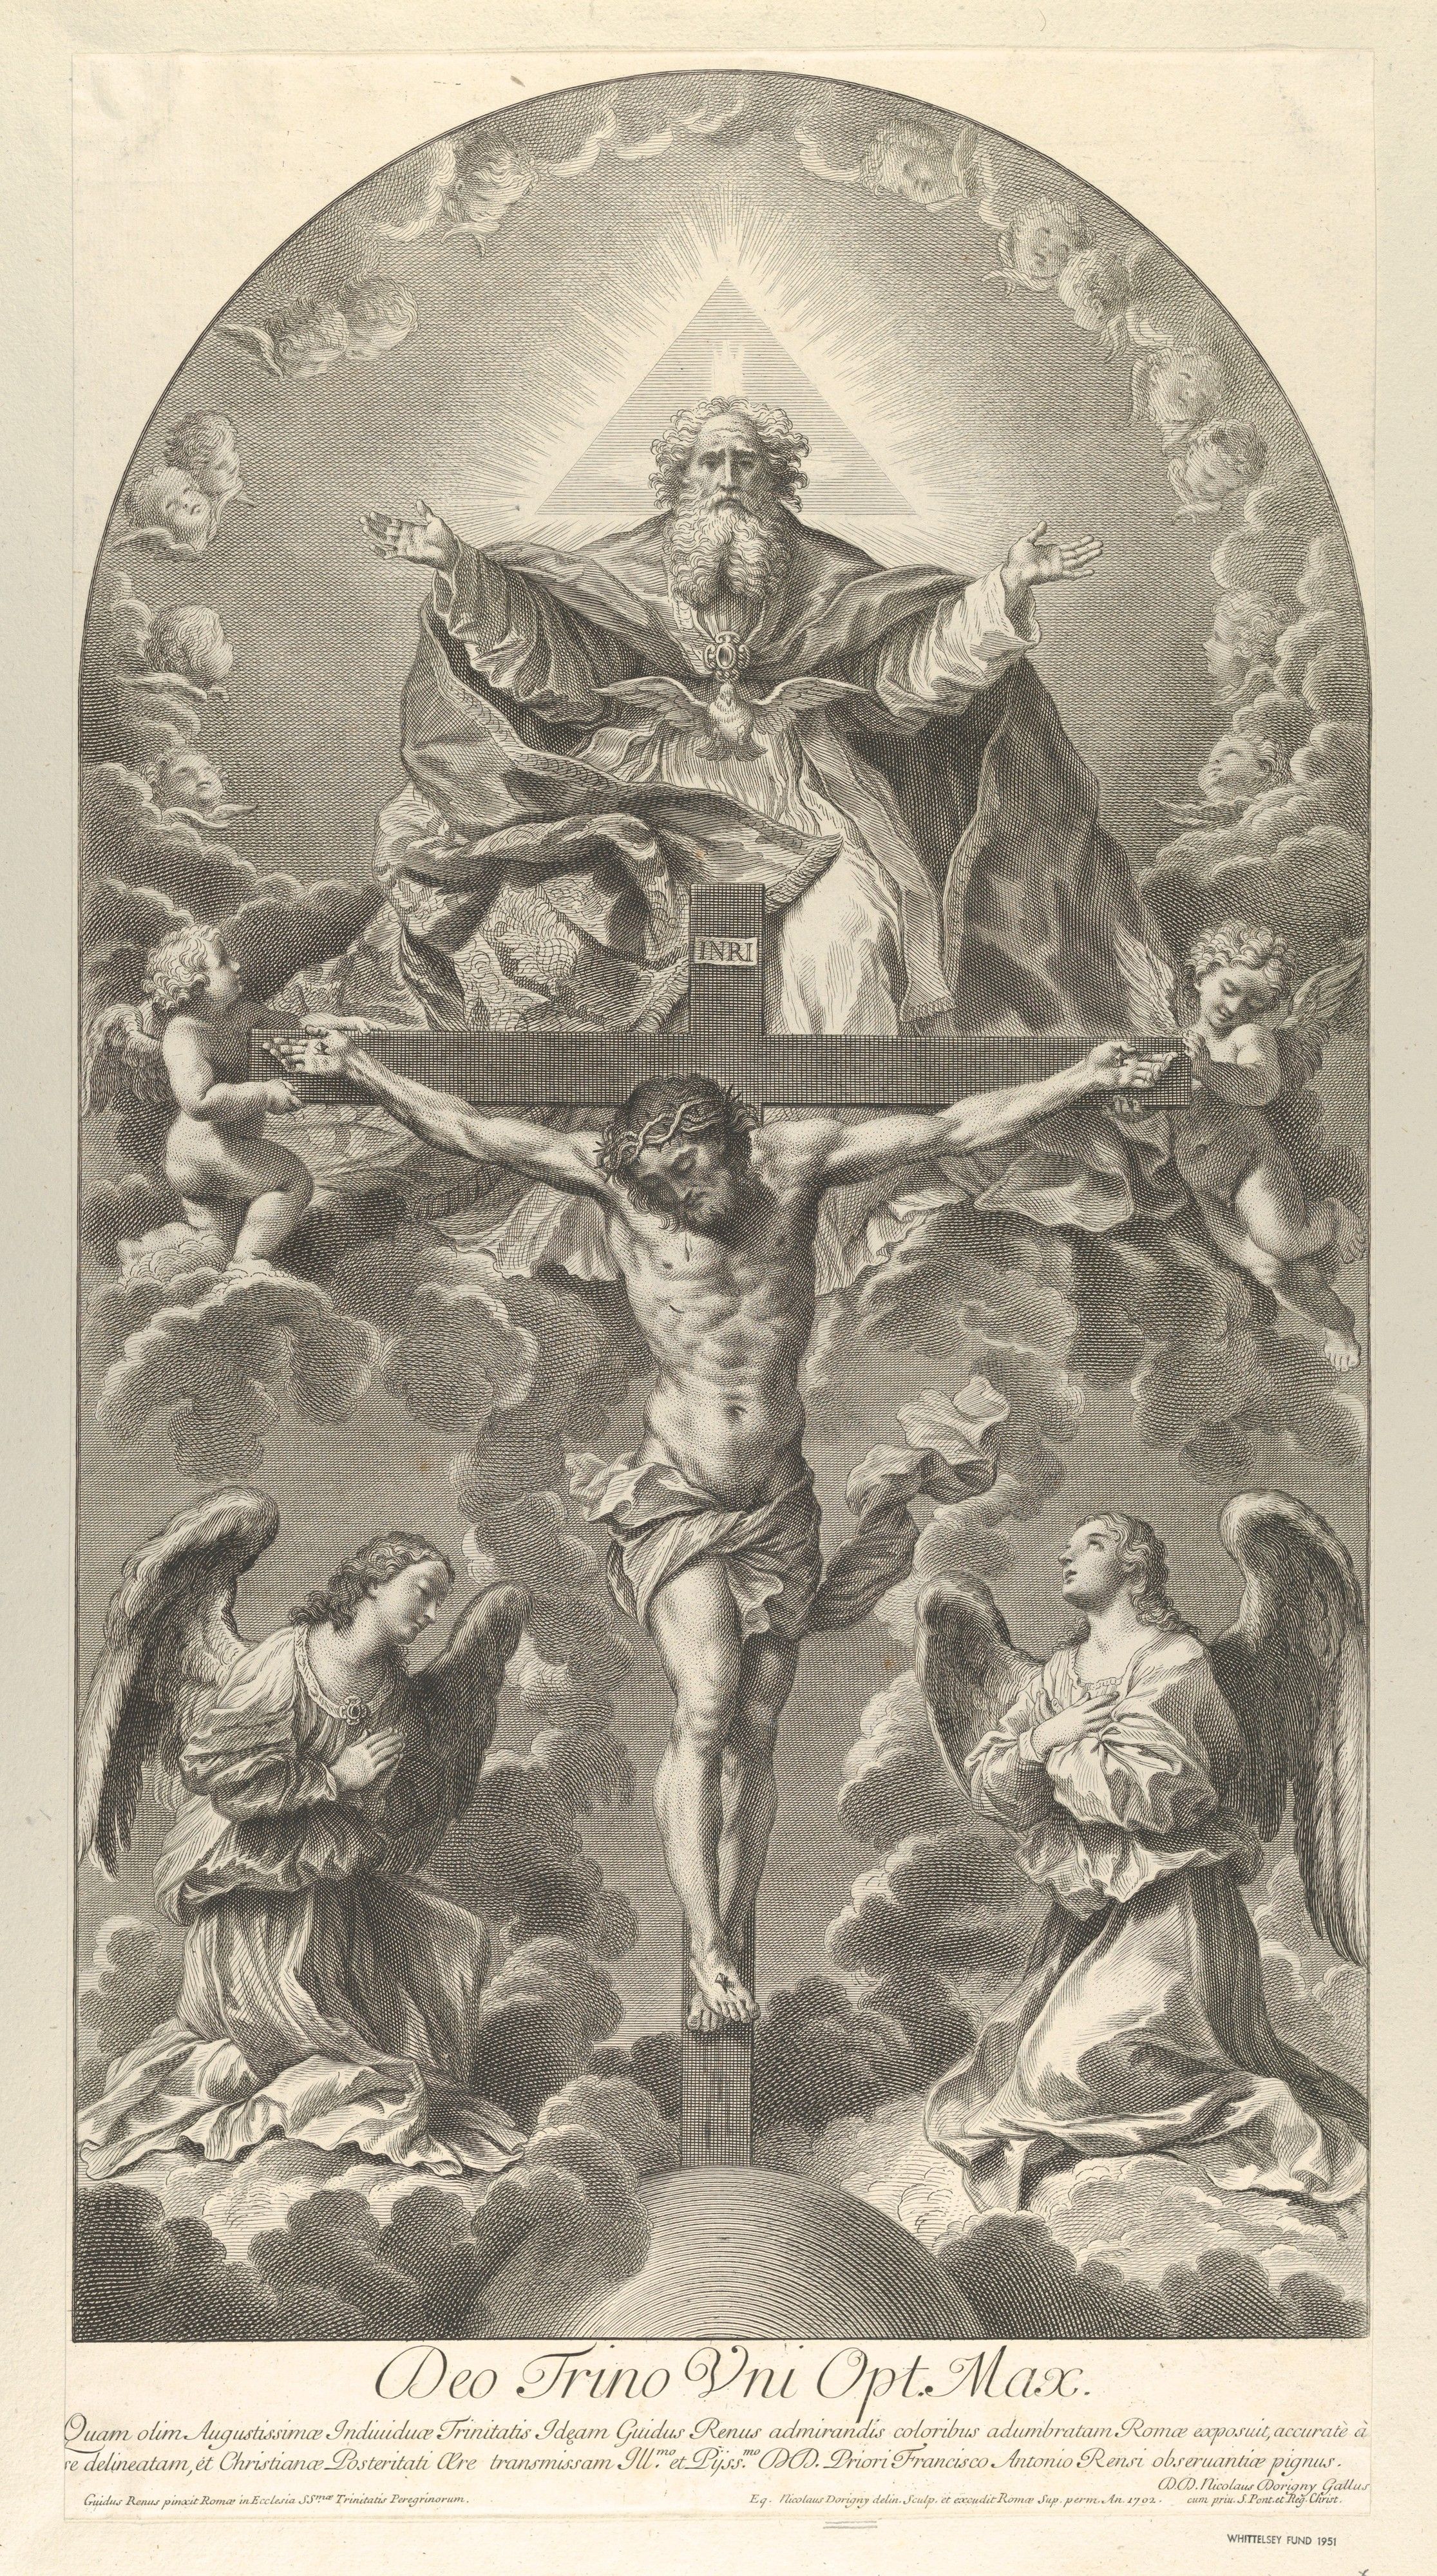 Sir Nicolas Dorigny. The Holy Trinity; Christ on the cross flanked by two angels, the Holy Spirit as a dove and God in heaven above the cross, a rectangular composition with